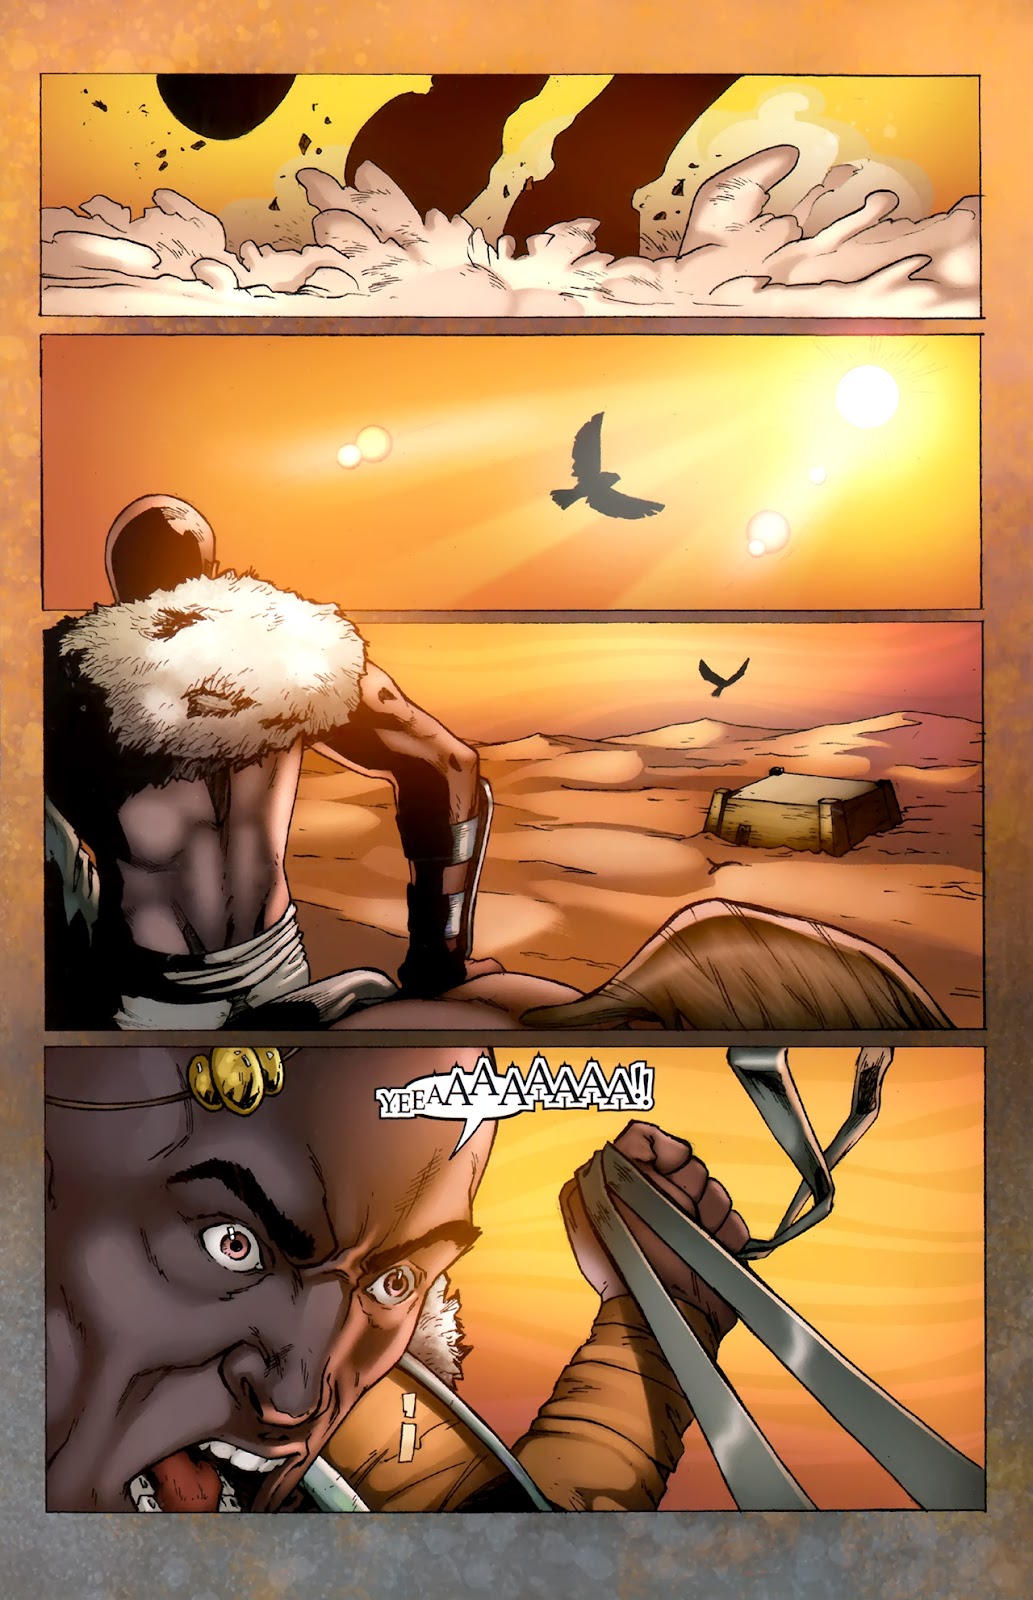 1001 Arabian Nights: The Adventures of Sinbad issue 11 - Page 10